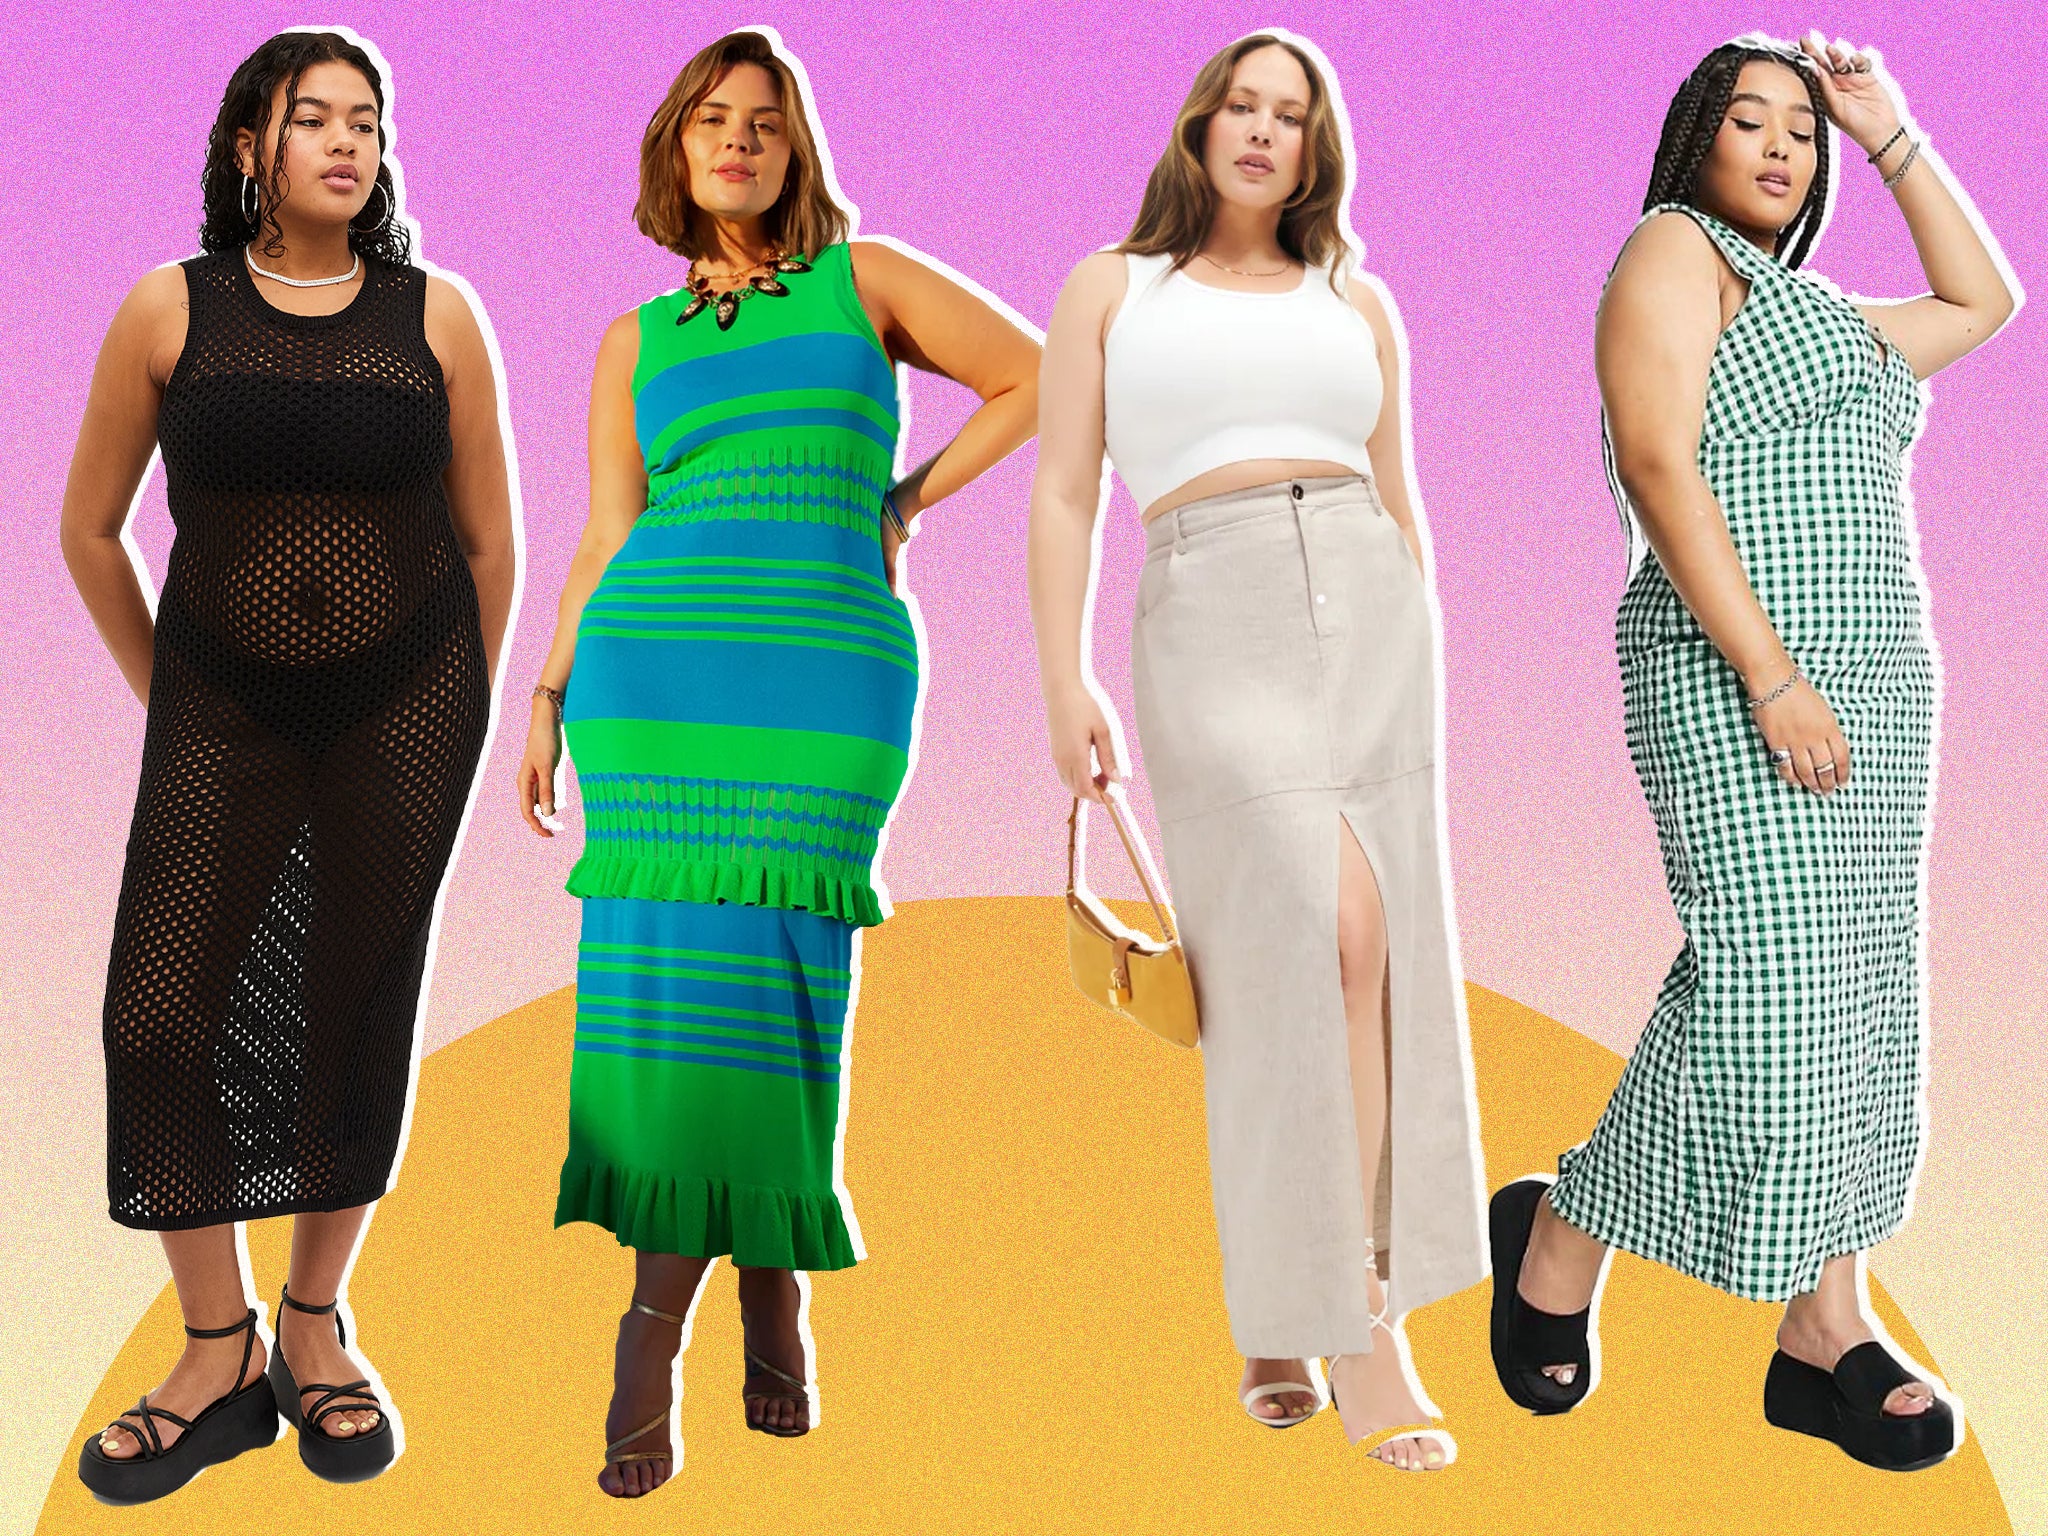 These Are The Top 5 Best Brands For Curvy Women | Plus-Size Brands